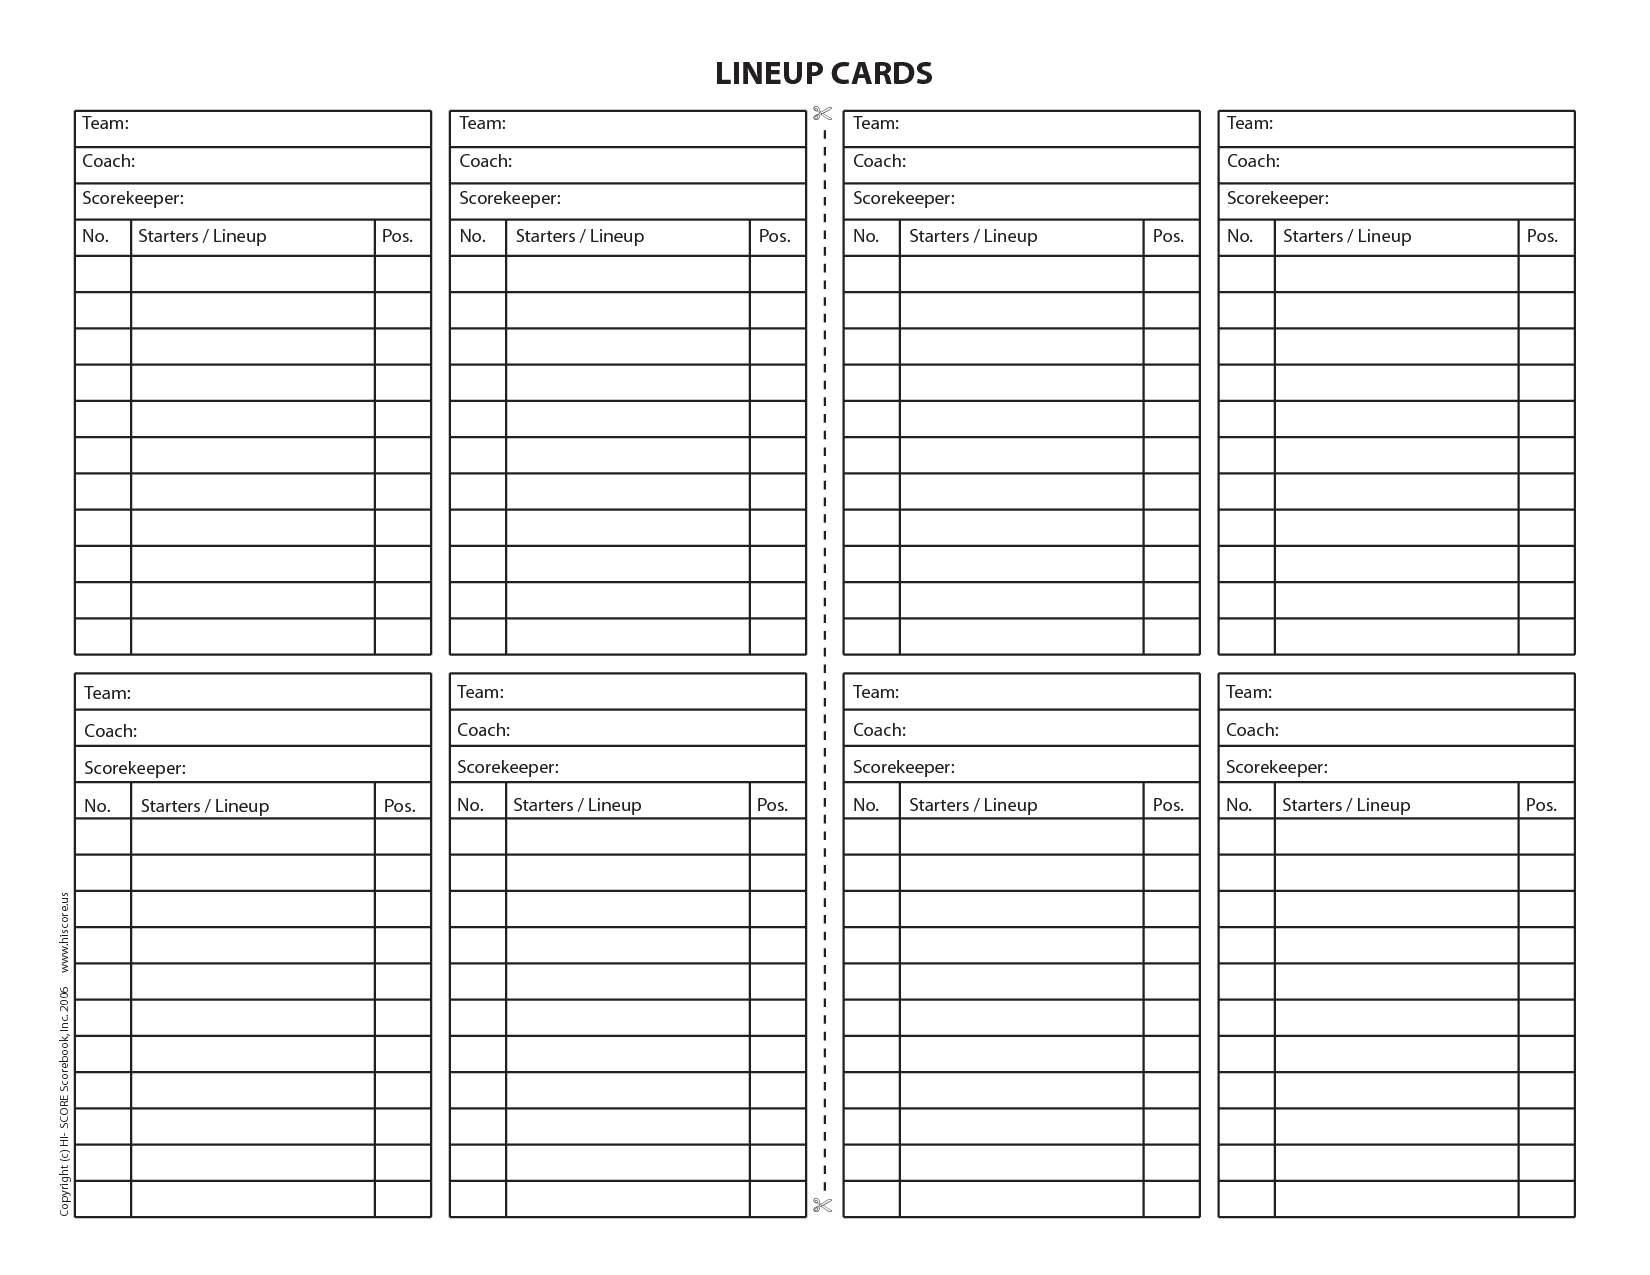 Baseball Lineup Card | Baseball Lineup, Lineup, Baseball Within Softball Lineup Card Template